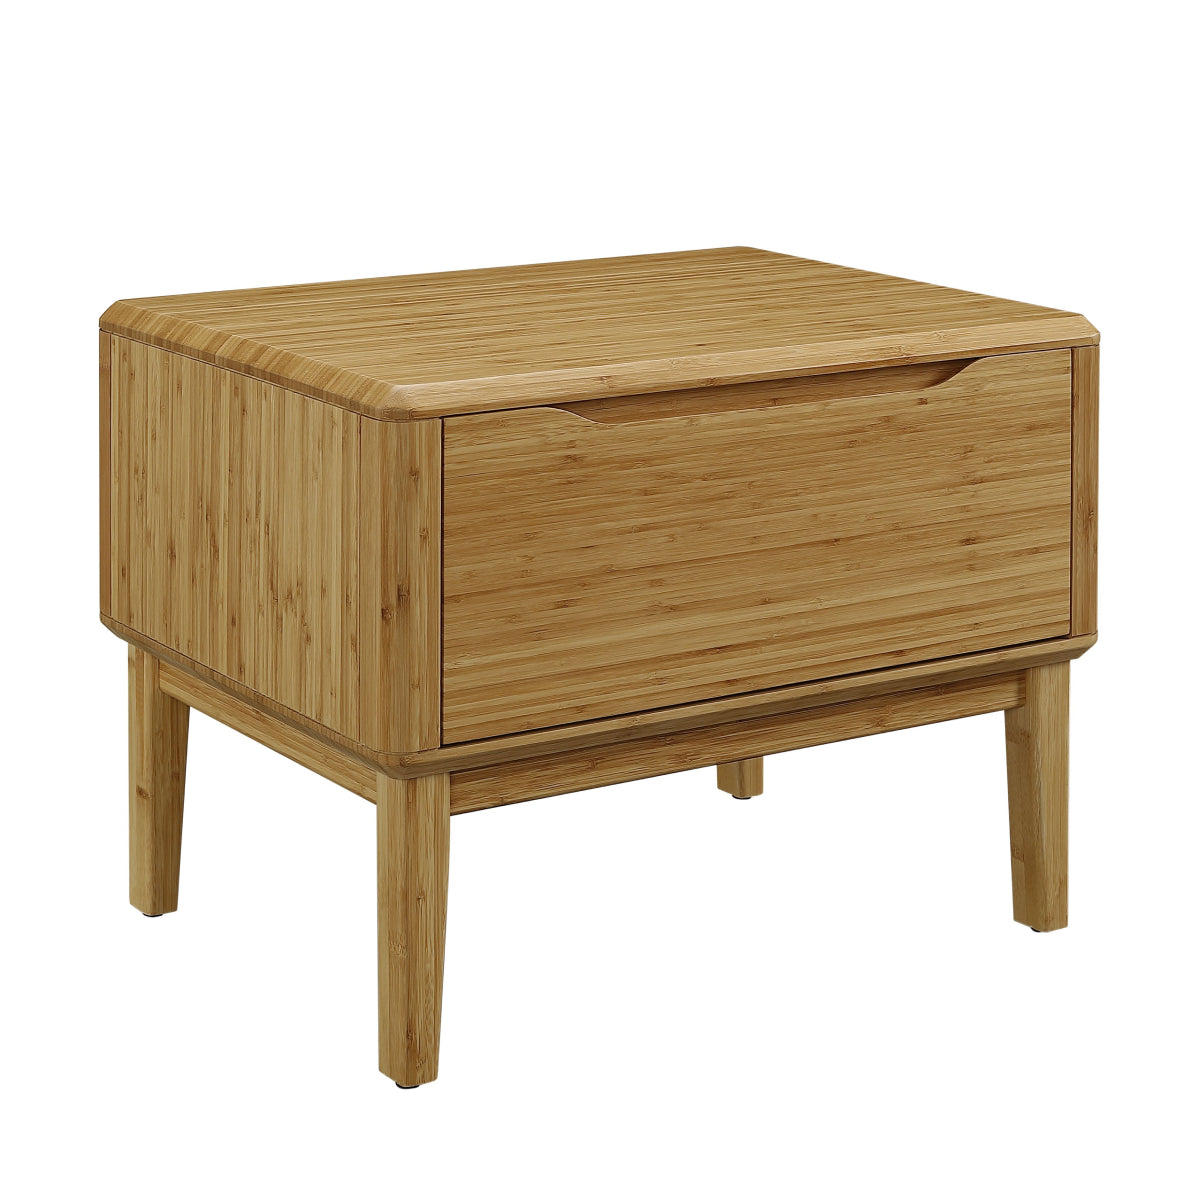 Load image into Gallery viewer, Currant Nightstand CaramelizedTables &amp;amp; Accessories Greenington  Caramelized   Four Hands, Burke Decor, Mid Century Modern Furniture, Old Bones Furniture Company, Old Bones Co, Modern Mid Century, Designer Furniture, https://www.oldbonesco.com/
